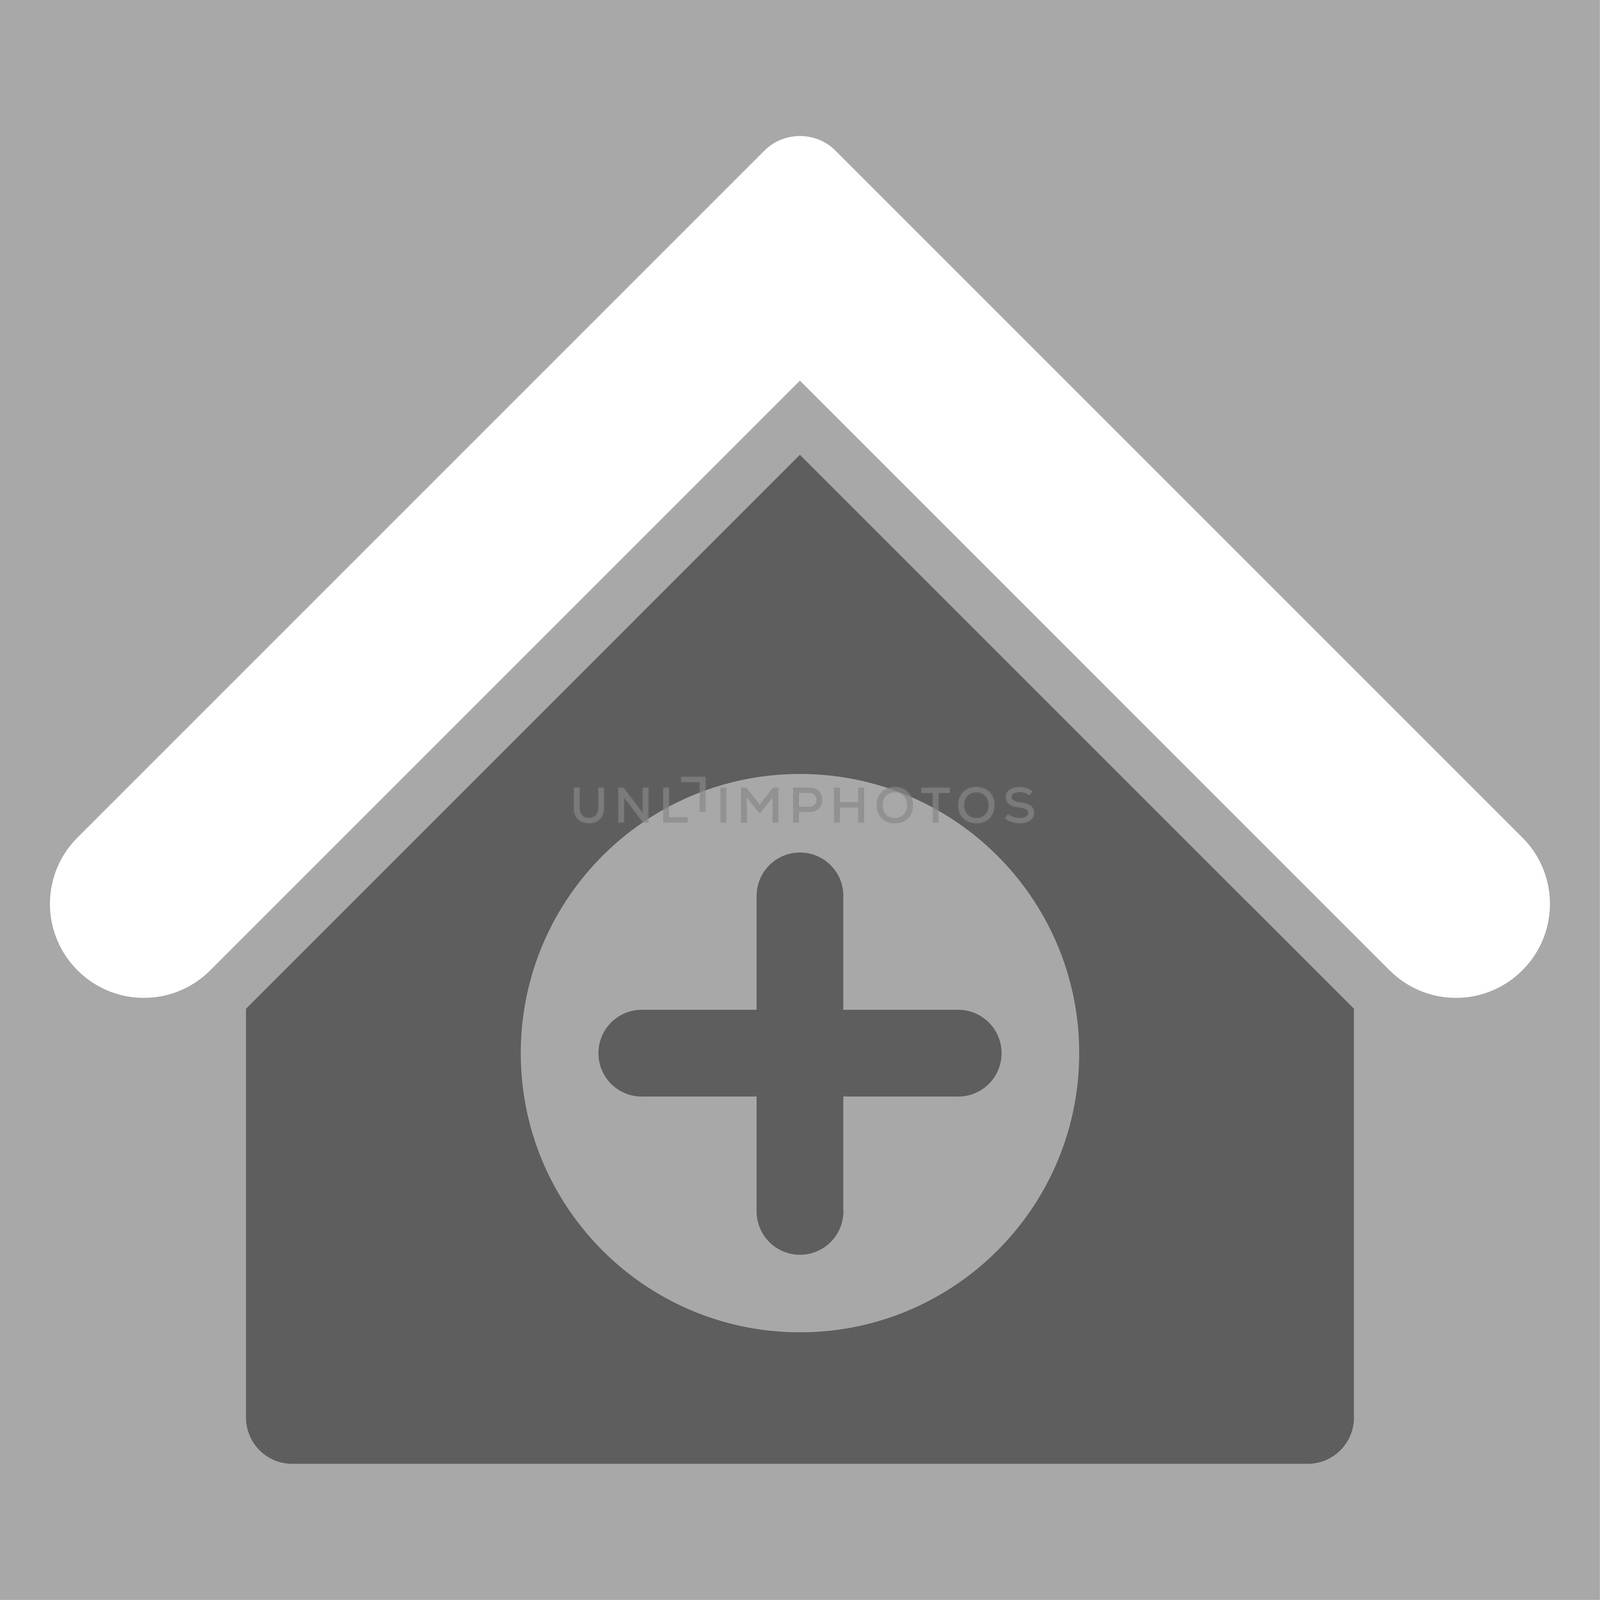 Hospital raster icon. Style is bicolor flat symbol, dark gray and white colors, rounded angles, silver background.